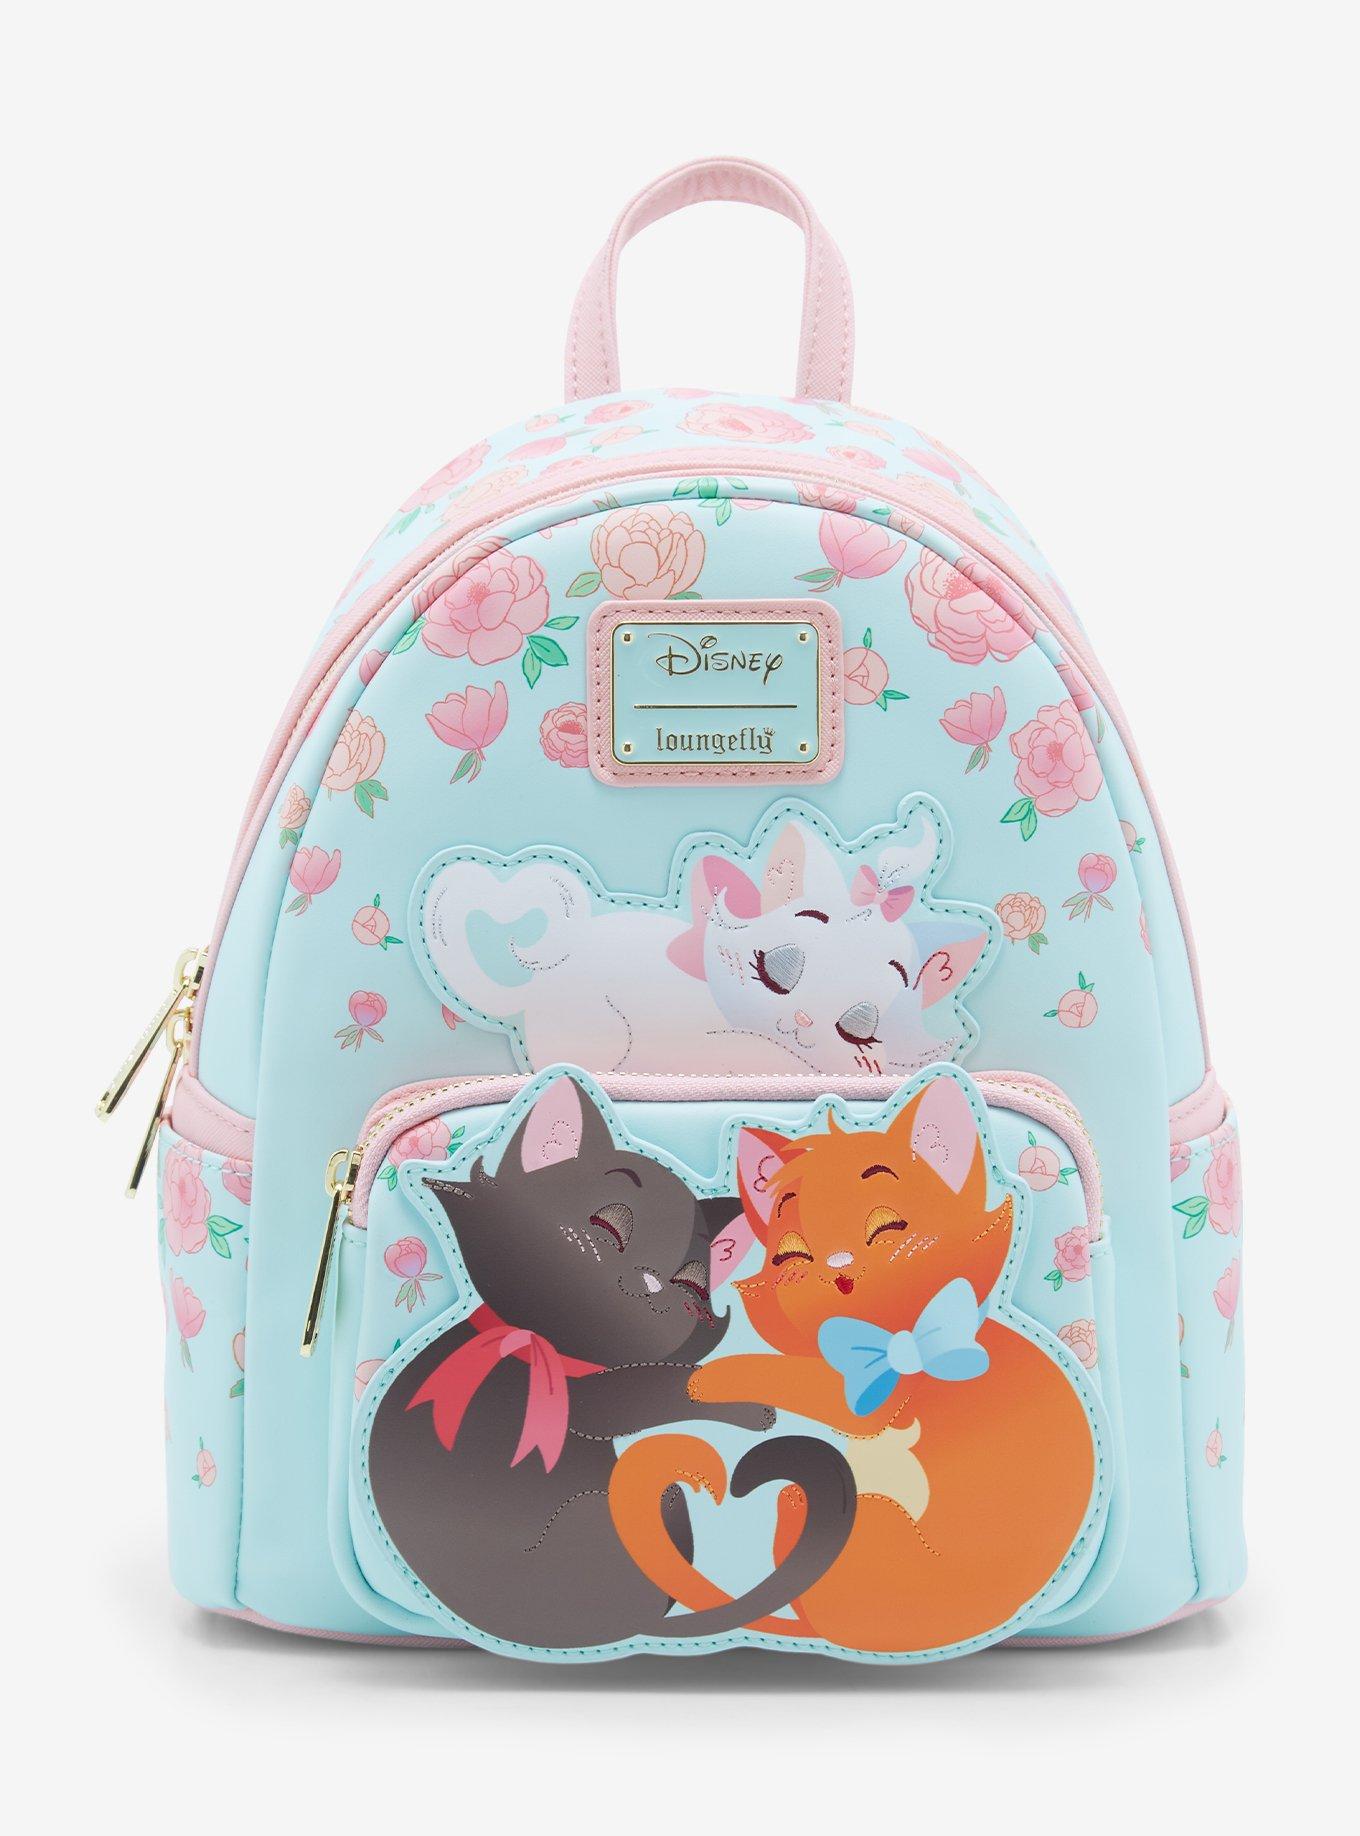 Hello Kitty Tan Western All-over Print Backpack